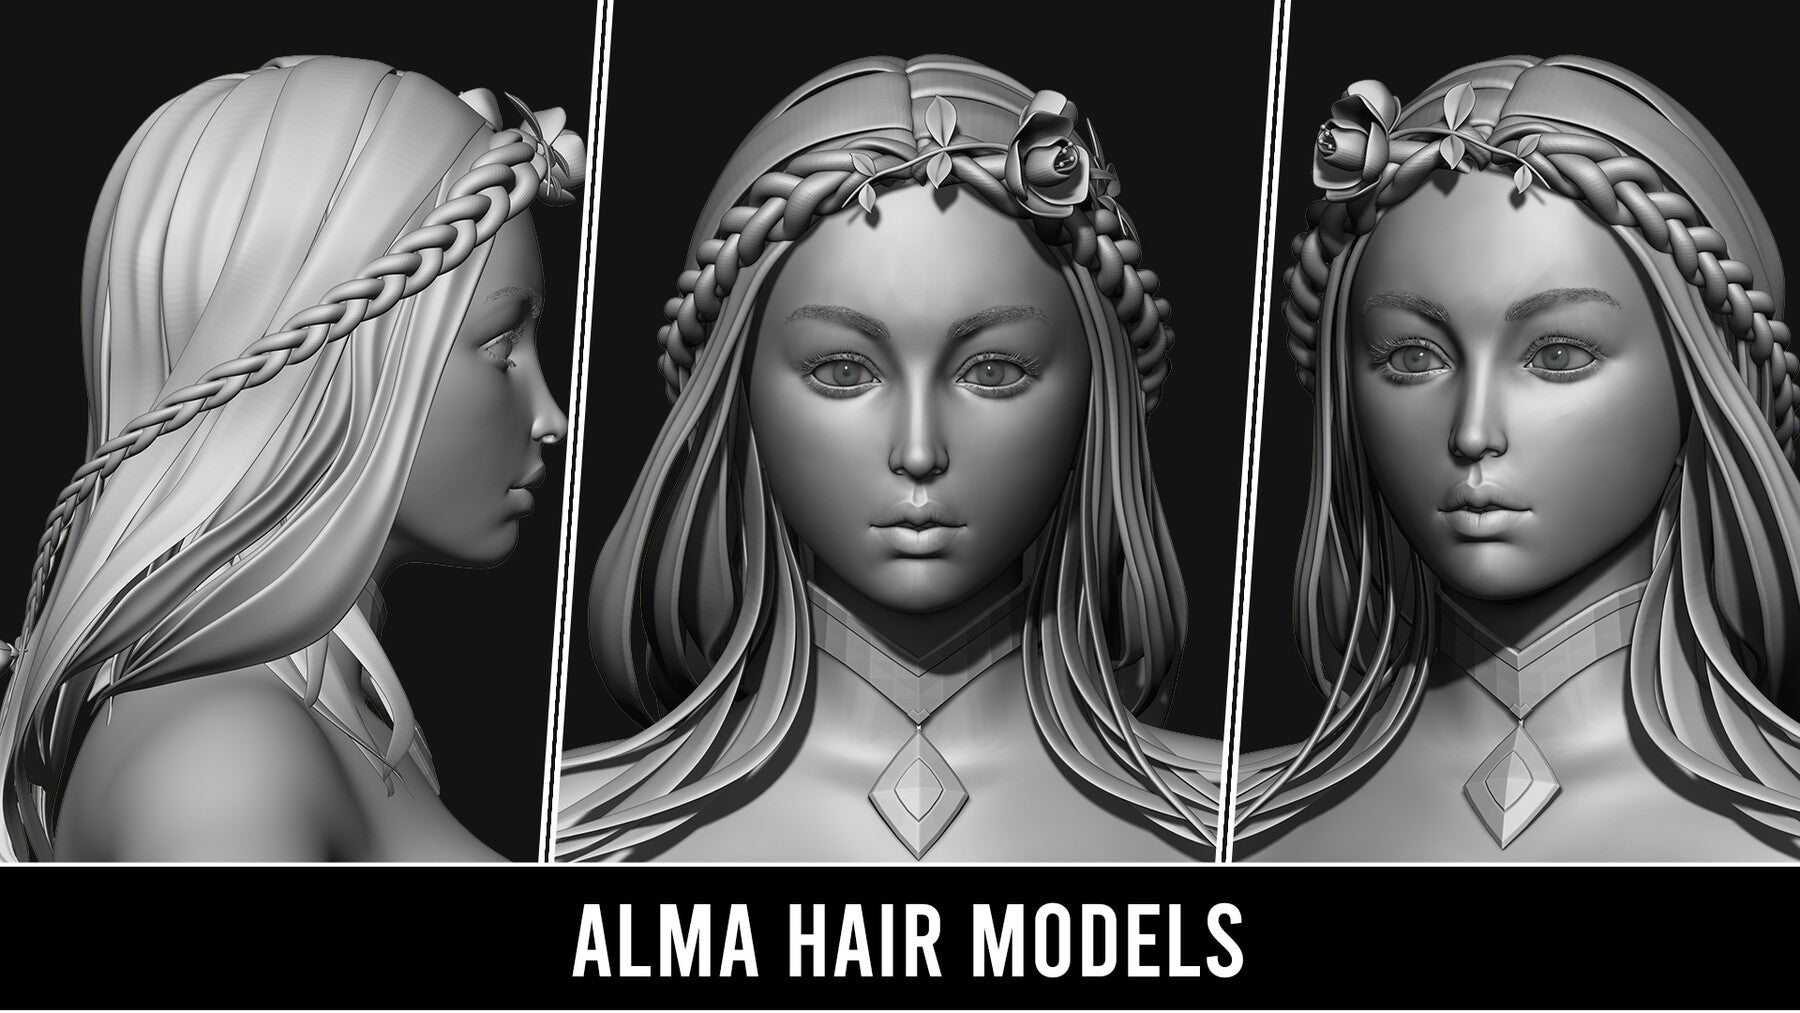 29 Hair Models With Accessories - Quad Topology + UV's